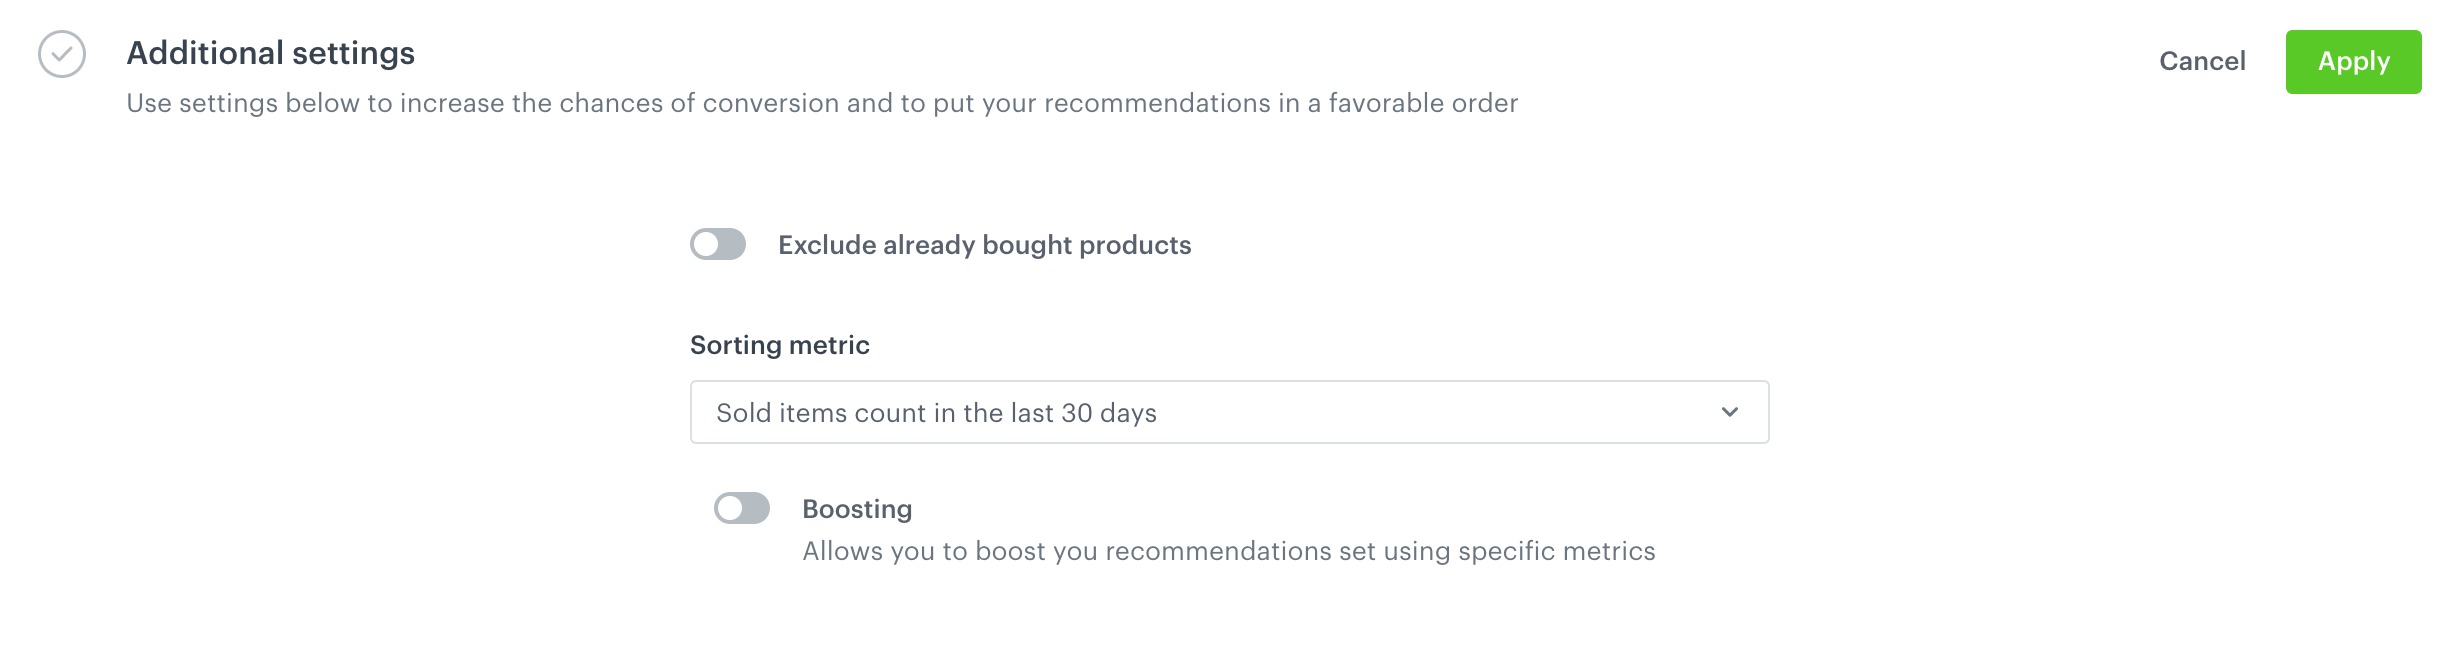 A metric that arranges the order of the items in the recommendation according to the amount of sold items